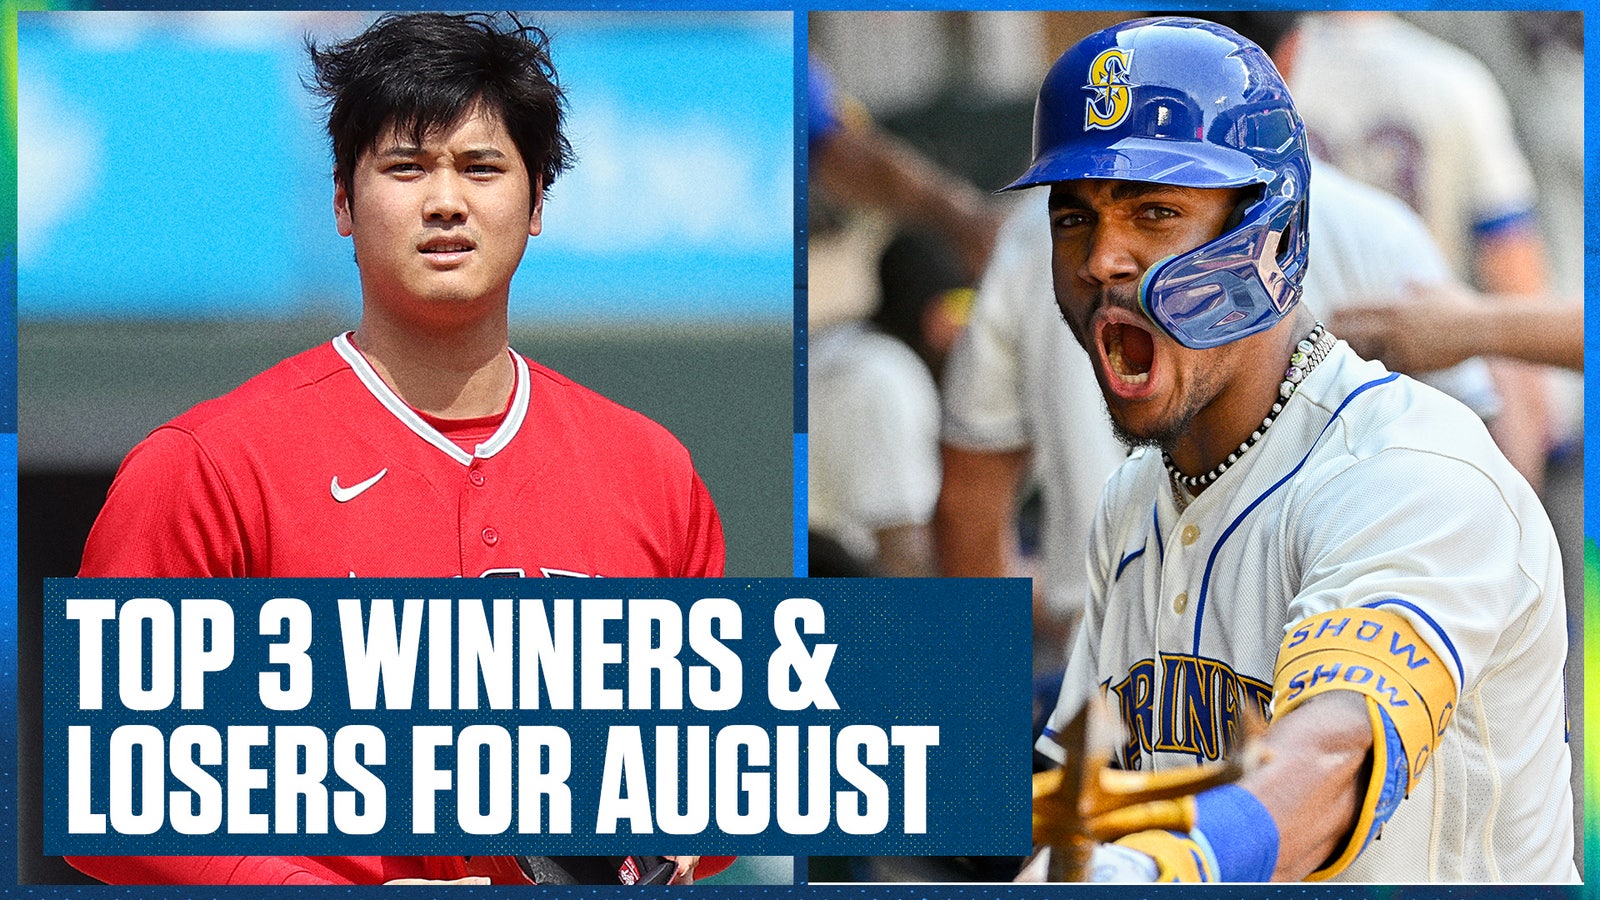 Mariners, Rangers highlight the three biggest winners and losers of August